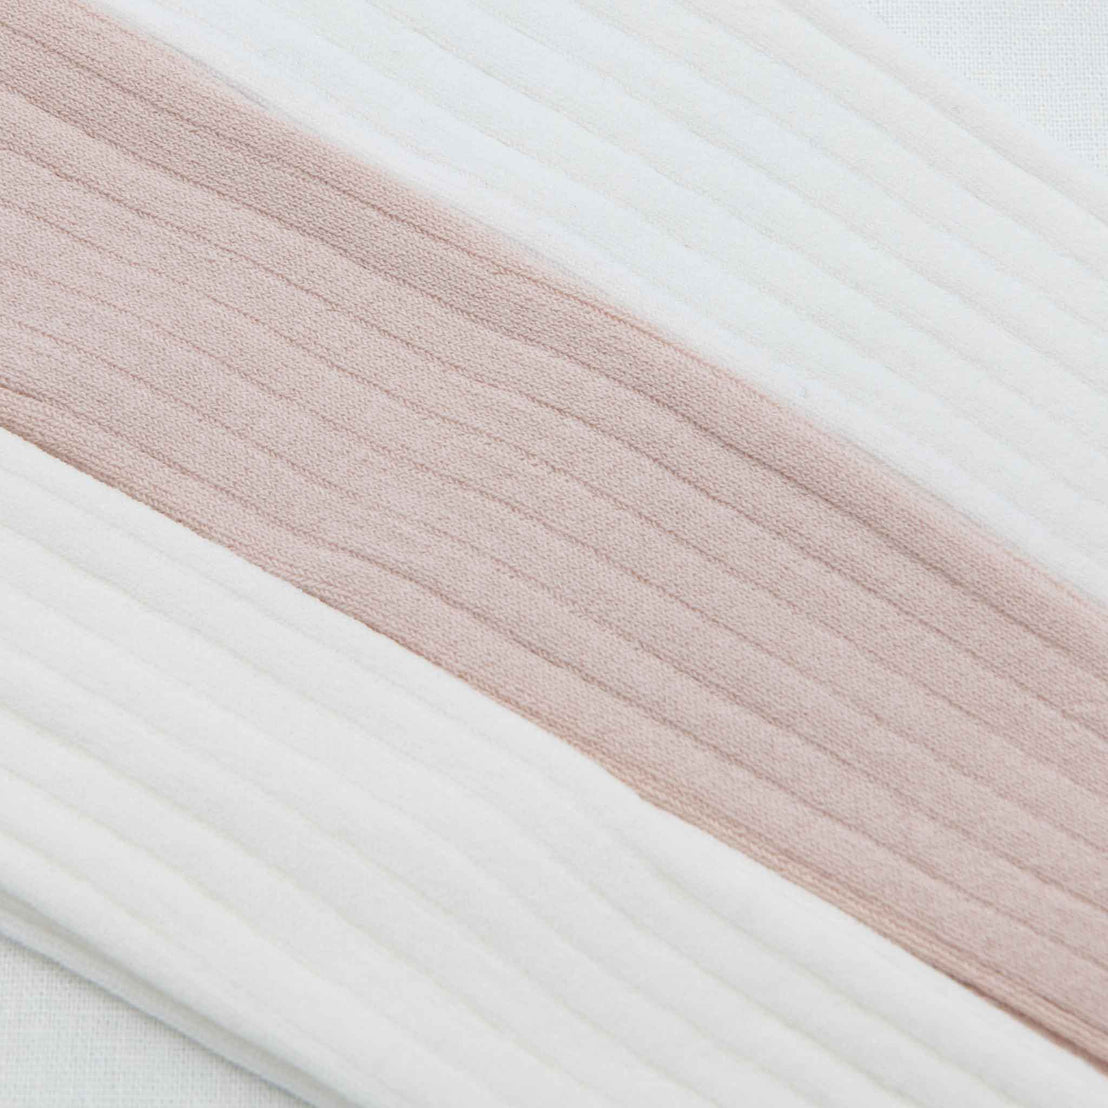 Close-up of various textured tights in the weave and stitching.